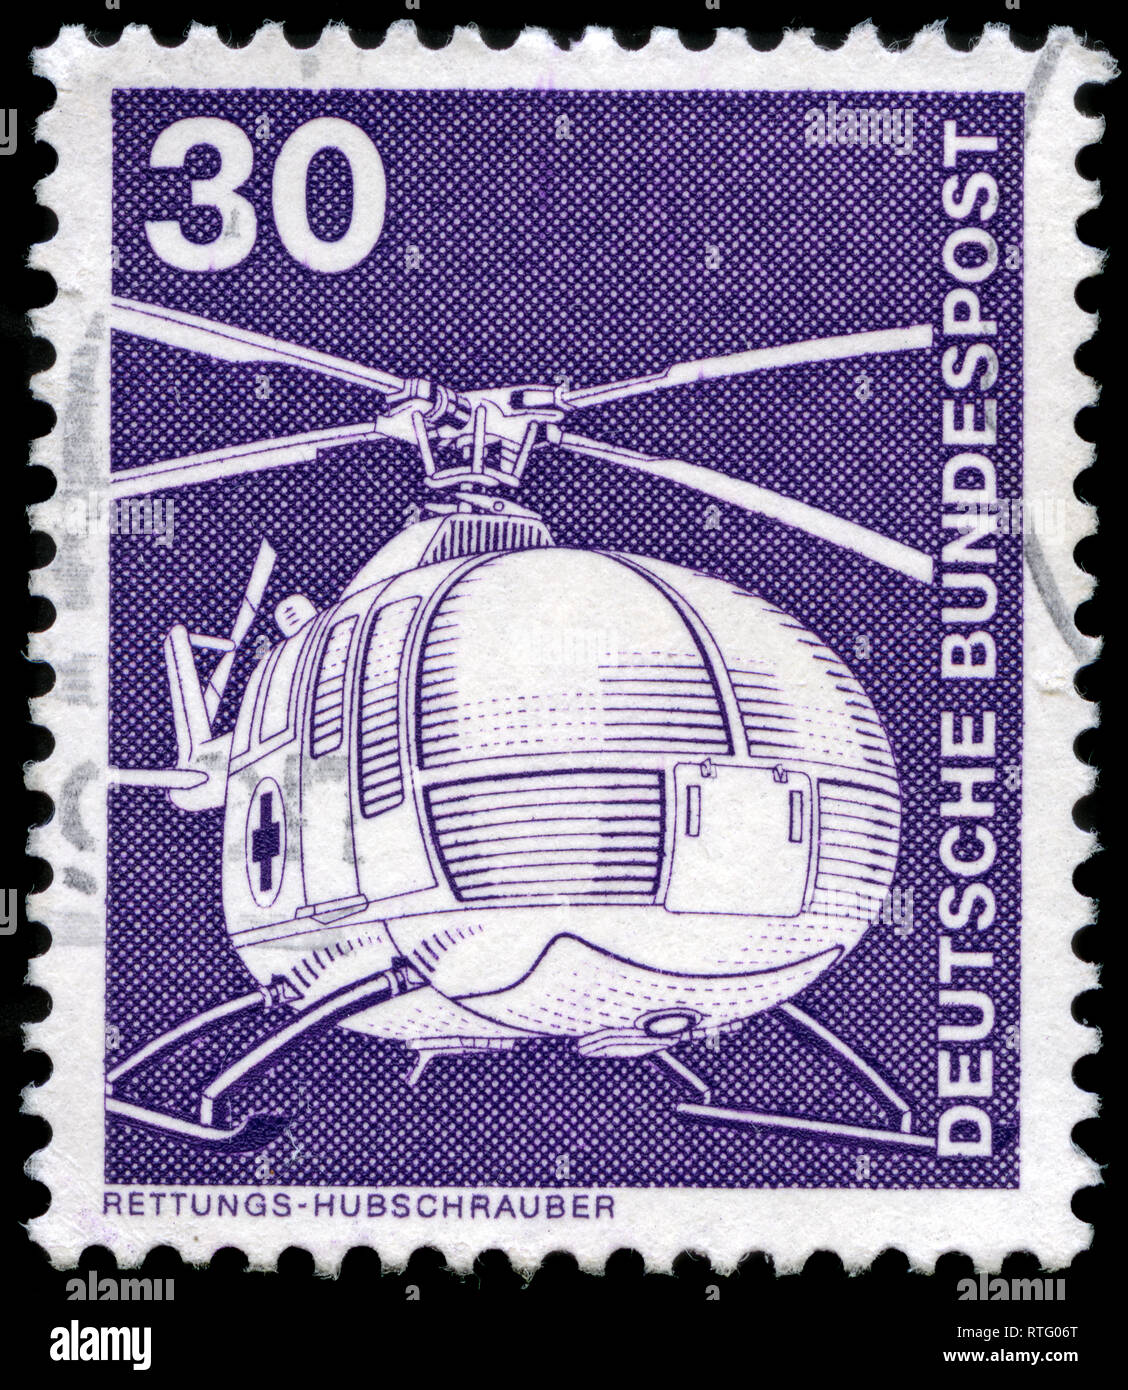 Postage stamp from the Federal Republic of Germany in the Industry and Technology Definitives 1975-1982 series issued in 1975 Stock Photo